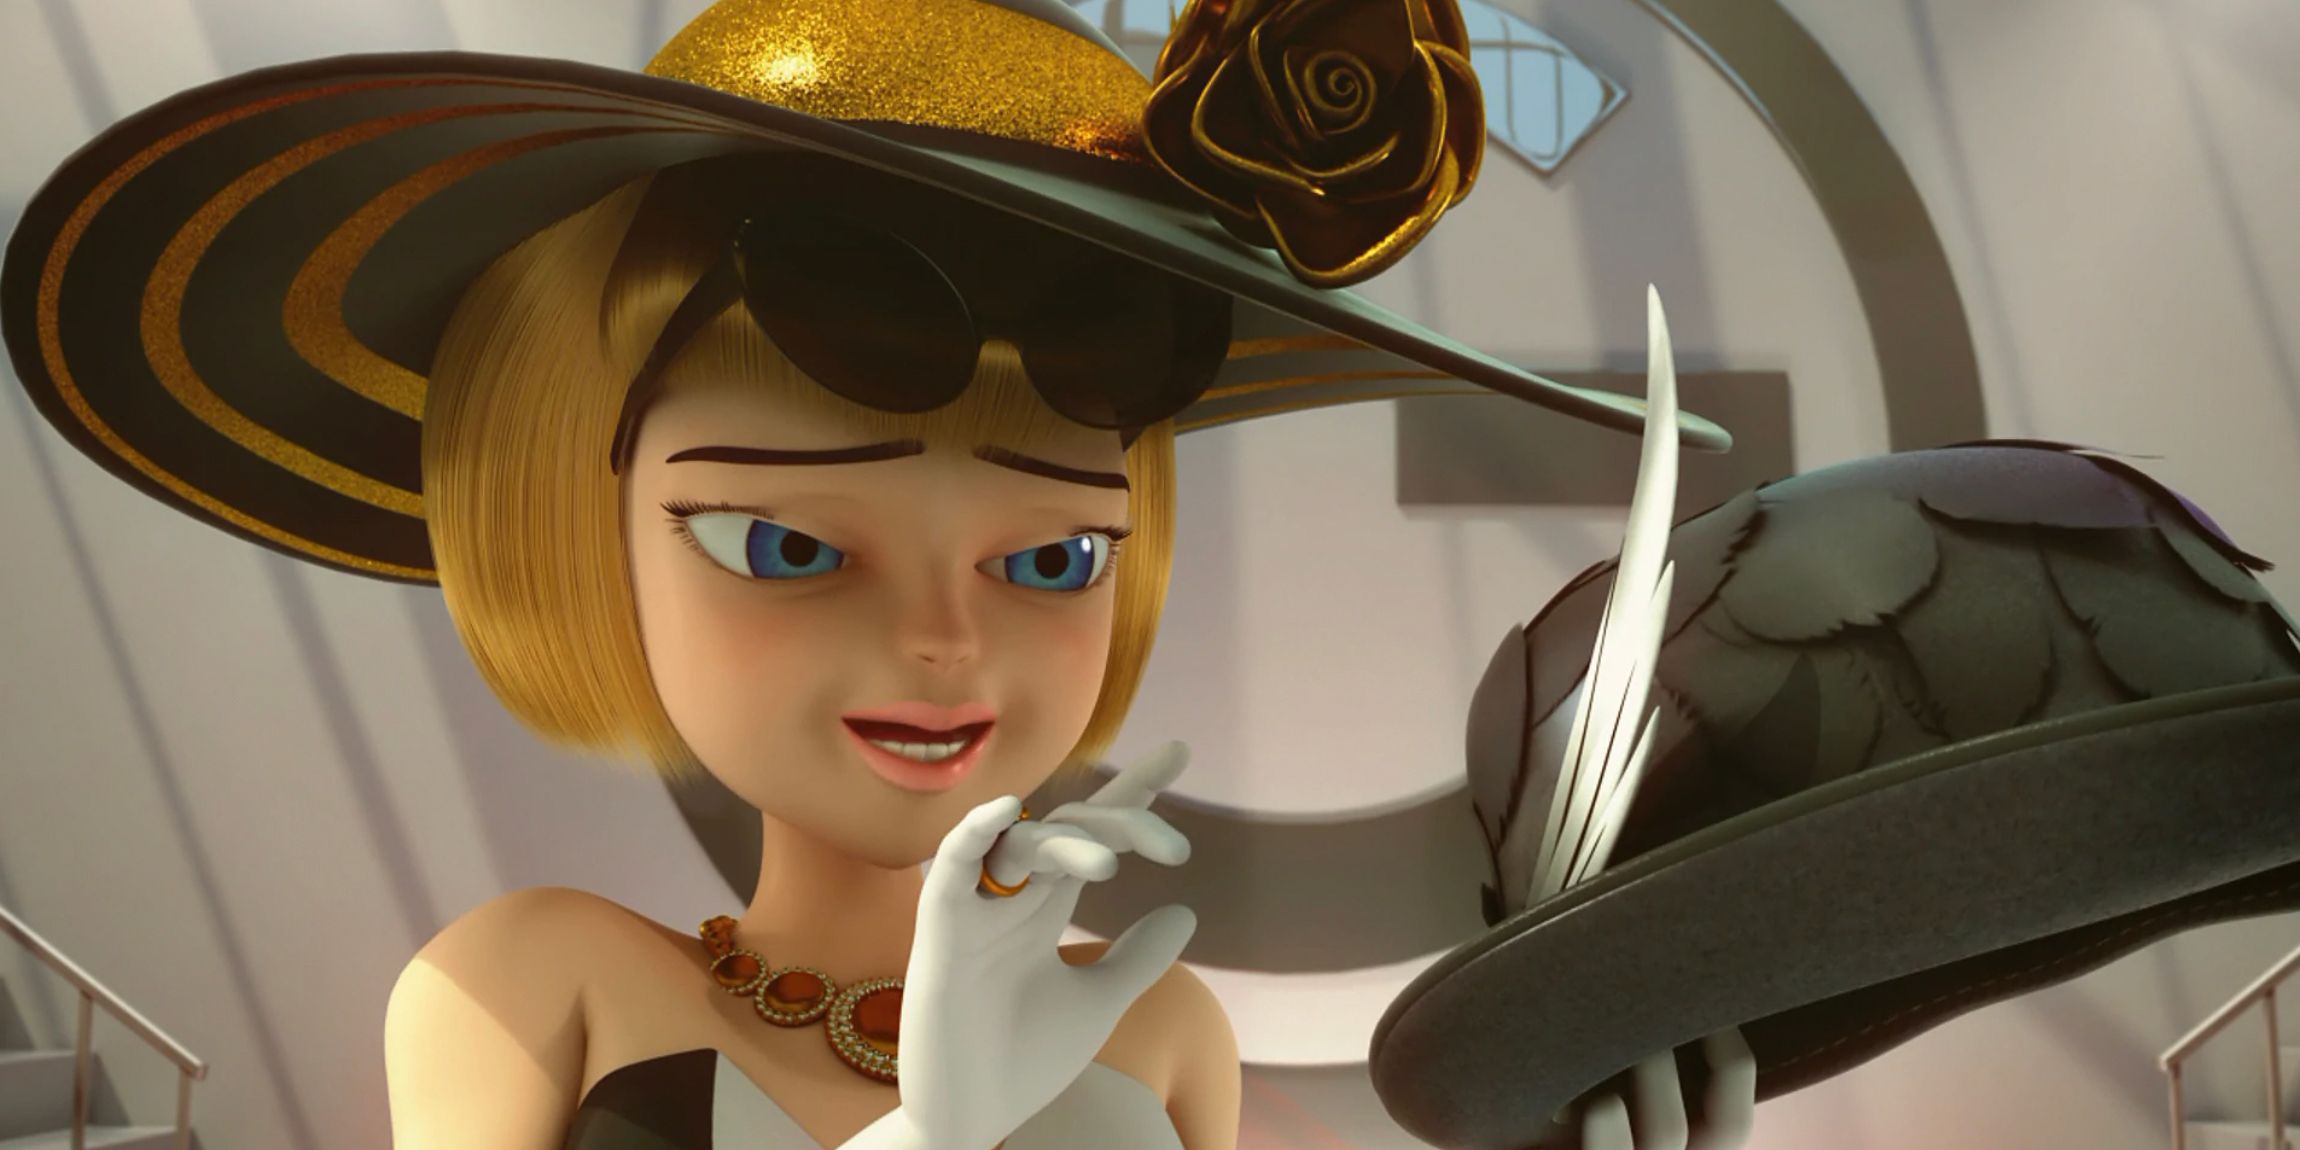 Audrey examines a hat in Miraculous Ladybug